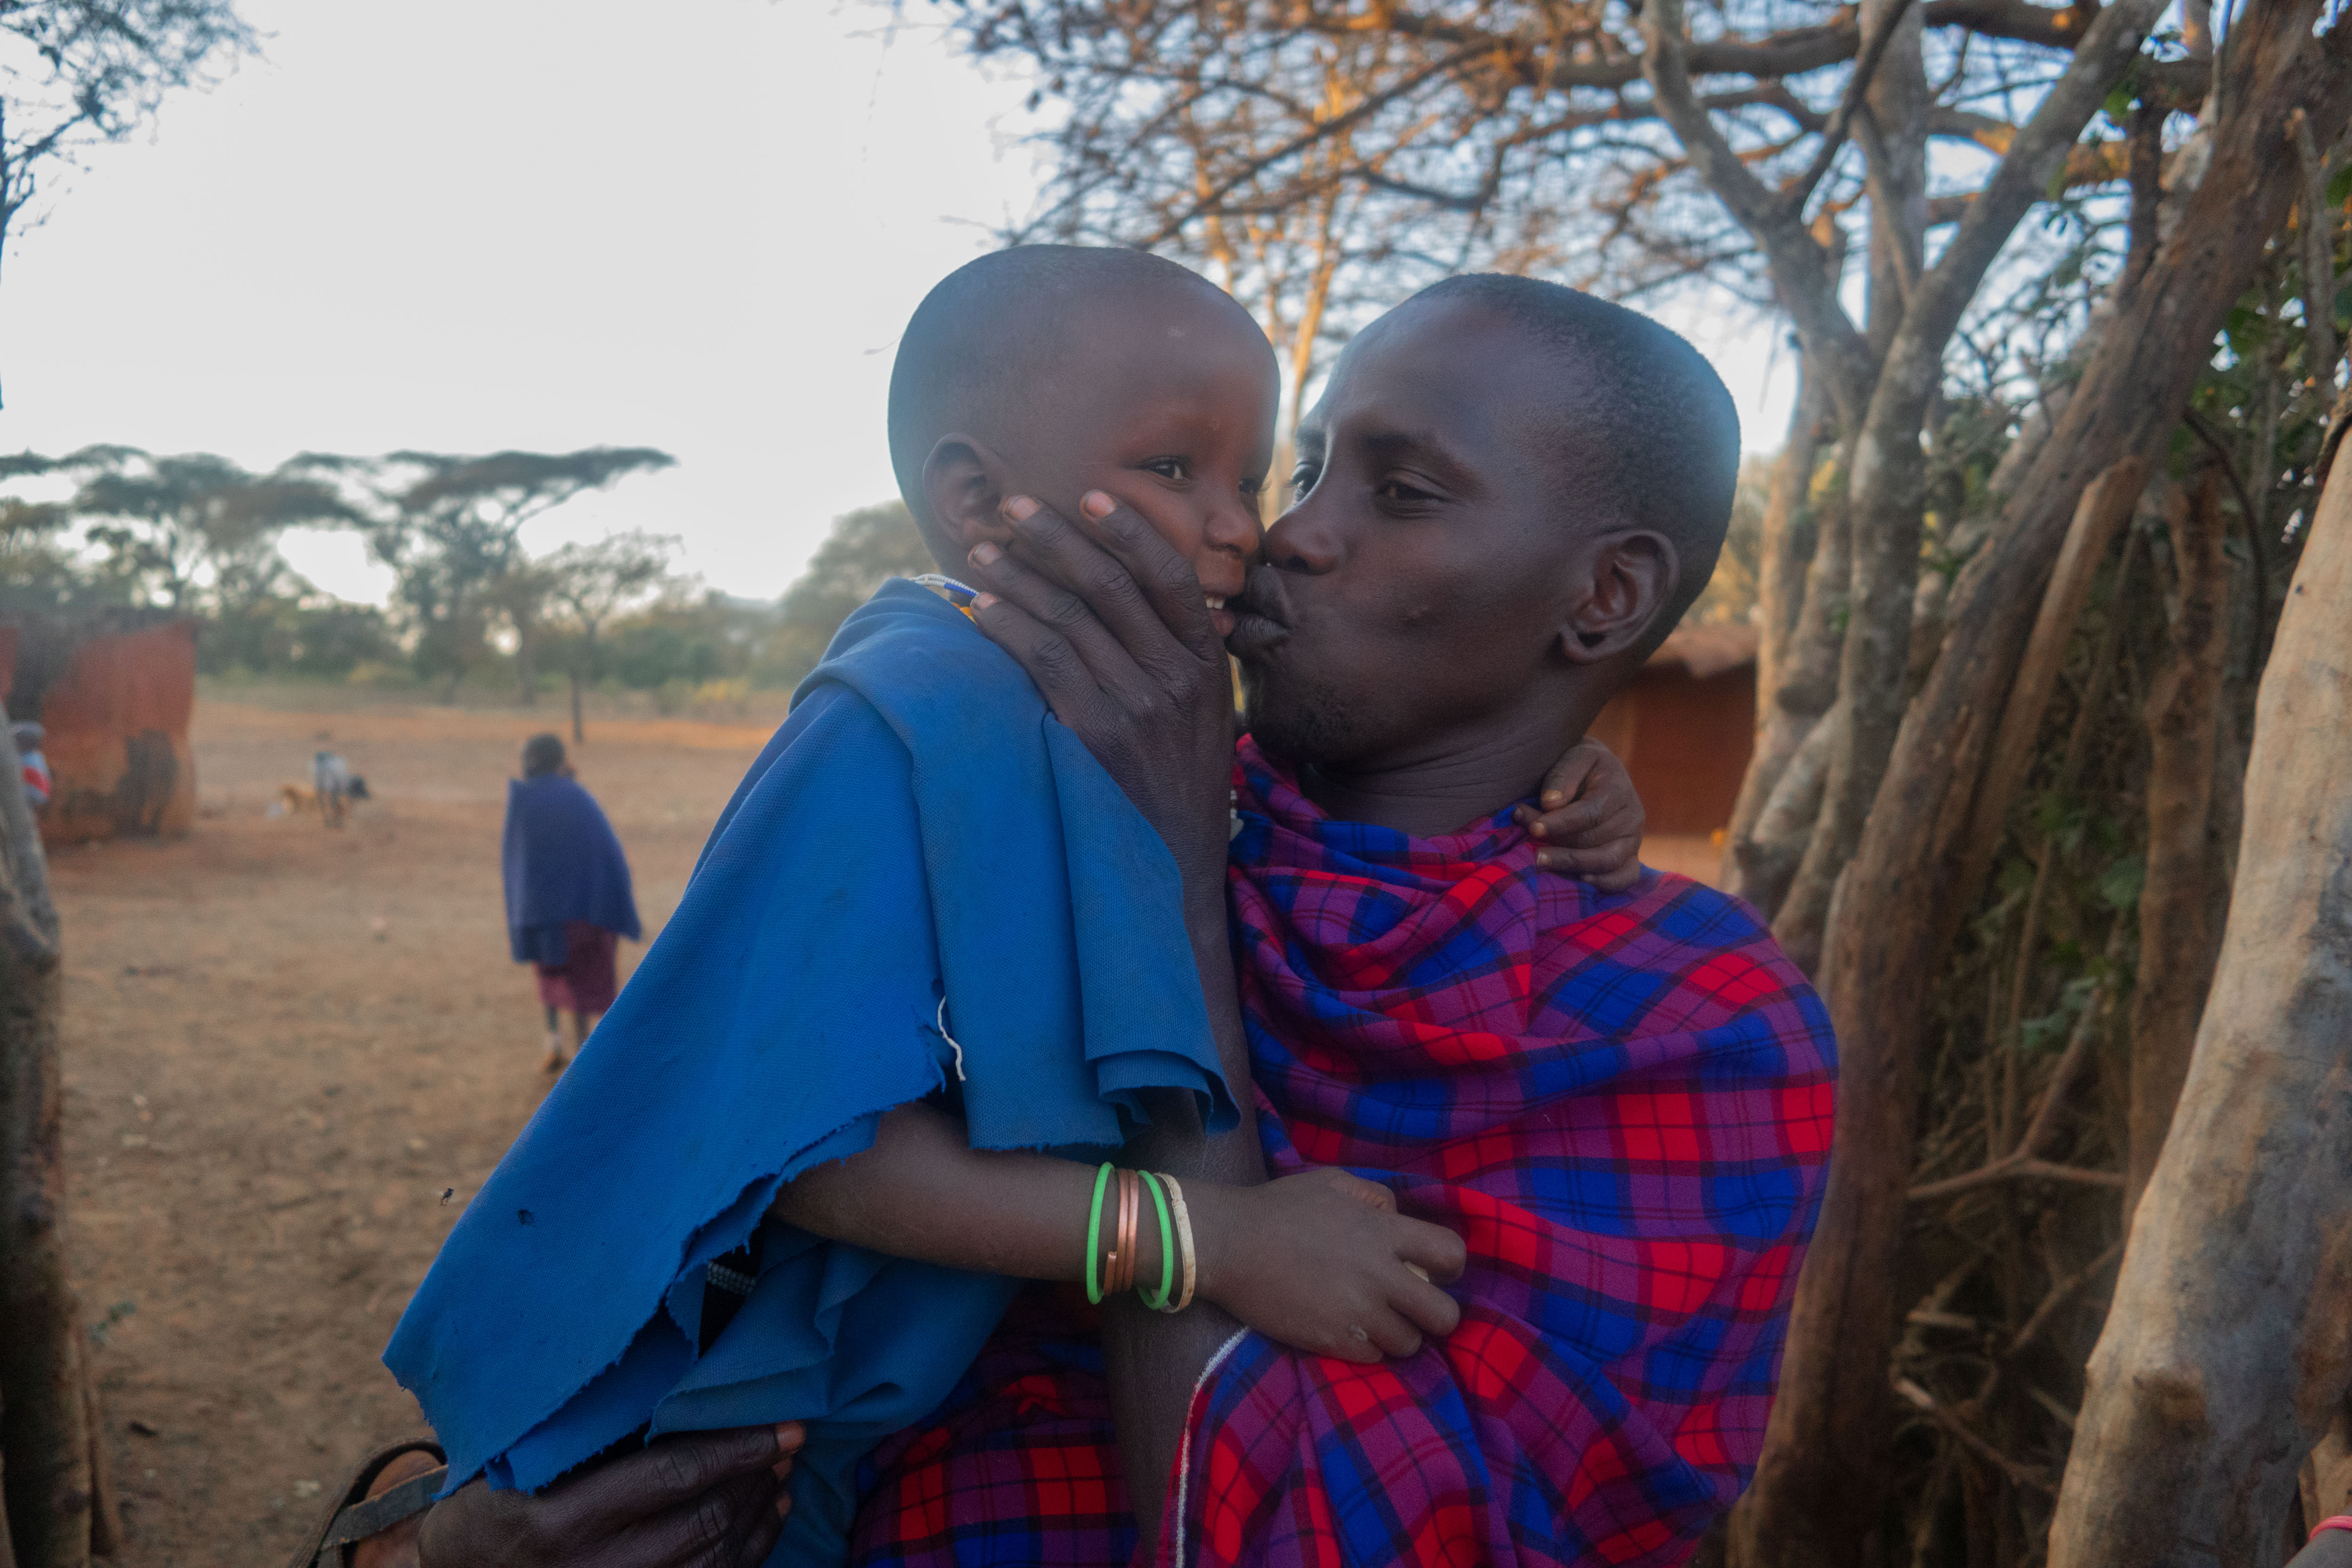 Father and daughter: Sangwa kisses his daughter, Nditolai, lovingly. As daughters grow up, their relationship with their father will become more polite and interactions more scarce, as this is the discipline of their culture. 